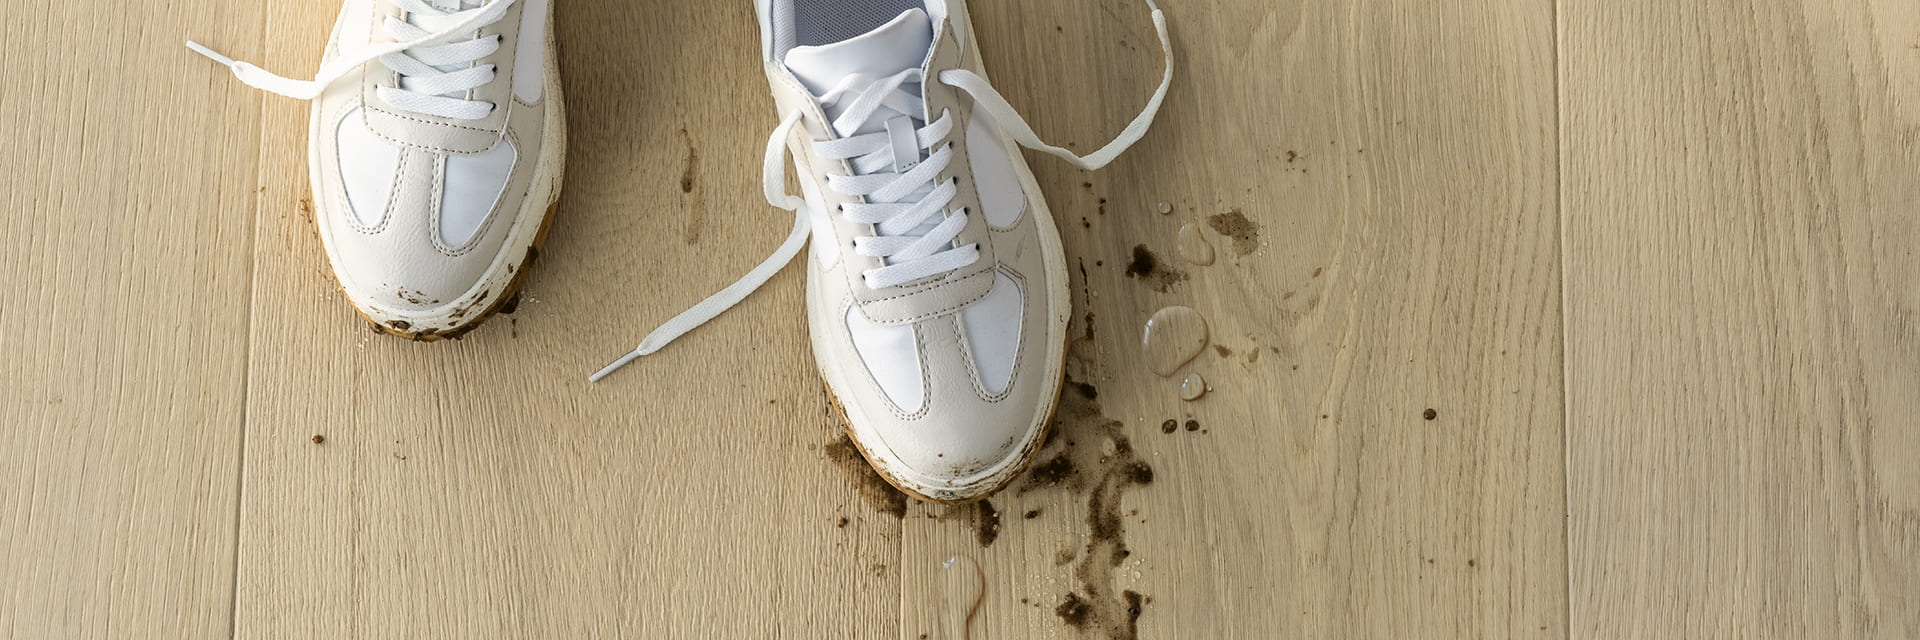 close up of dirty shoes with spilled mud and water on a beige wooden floor